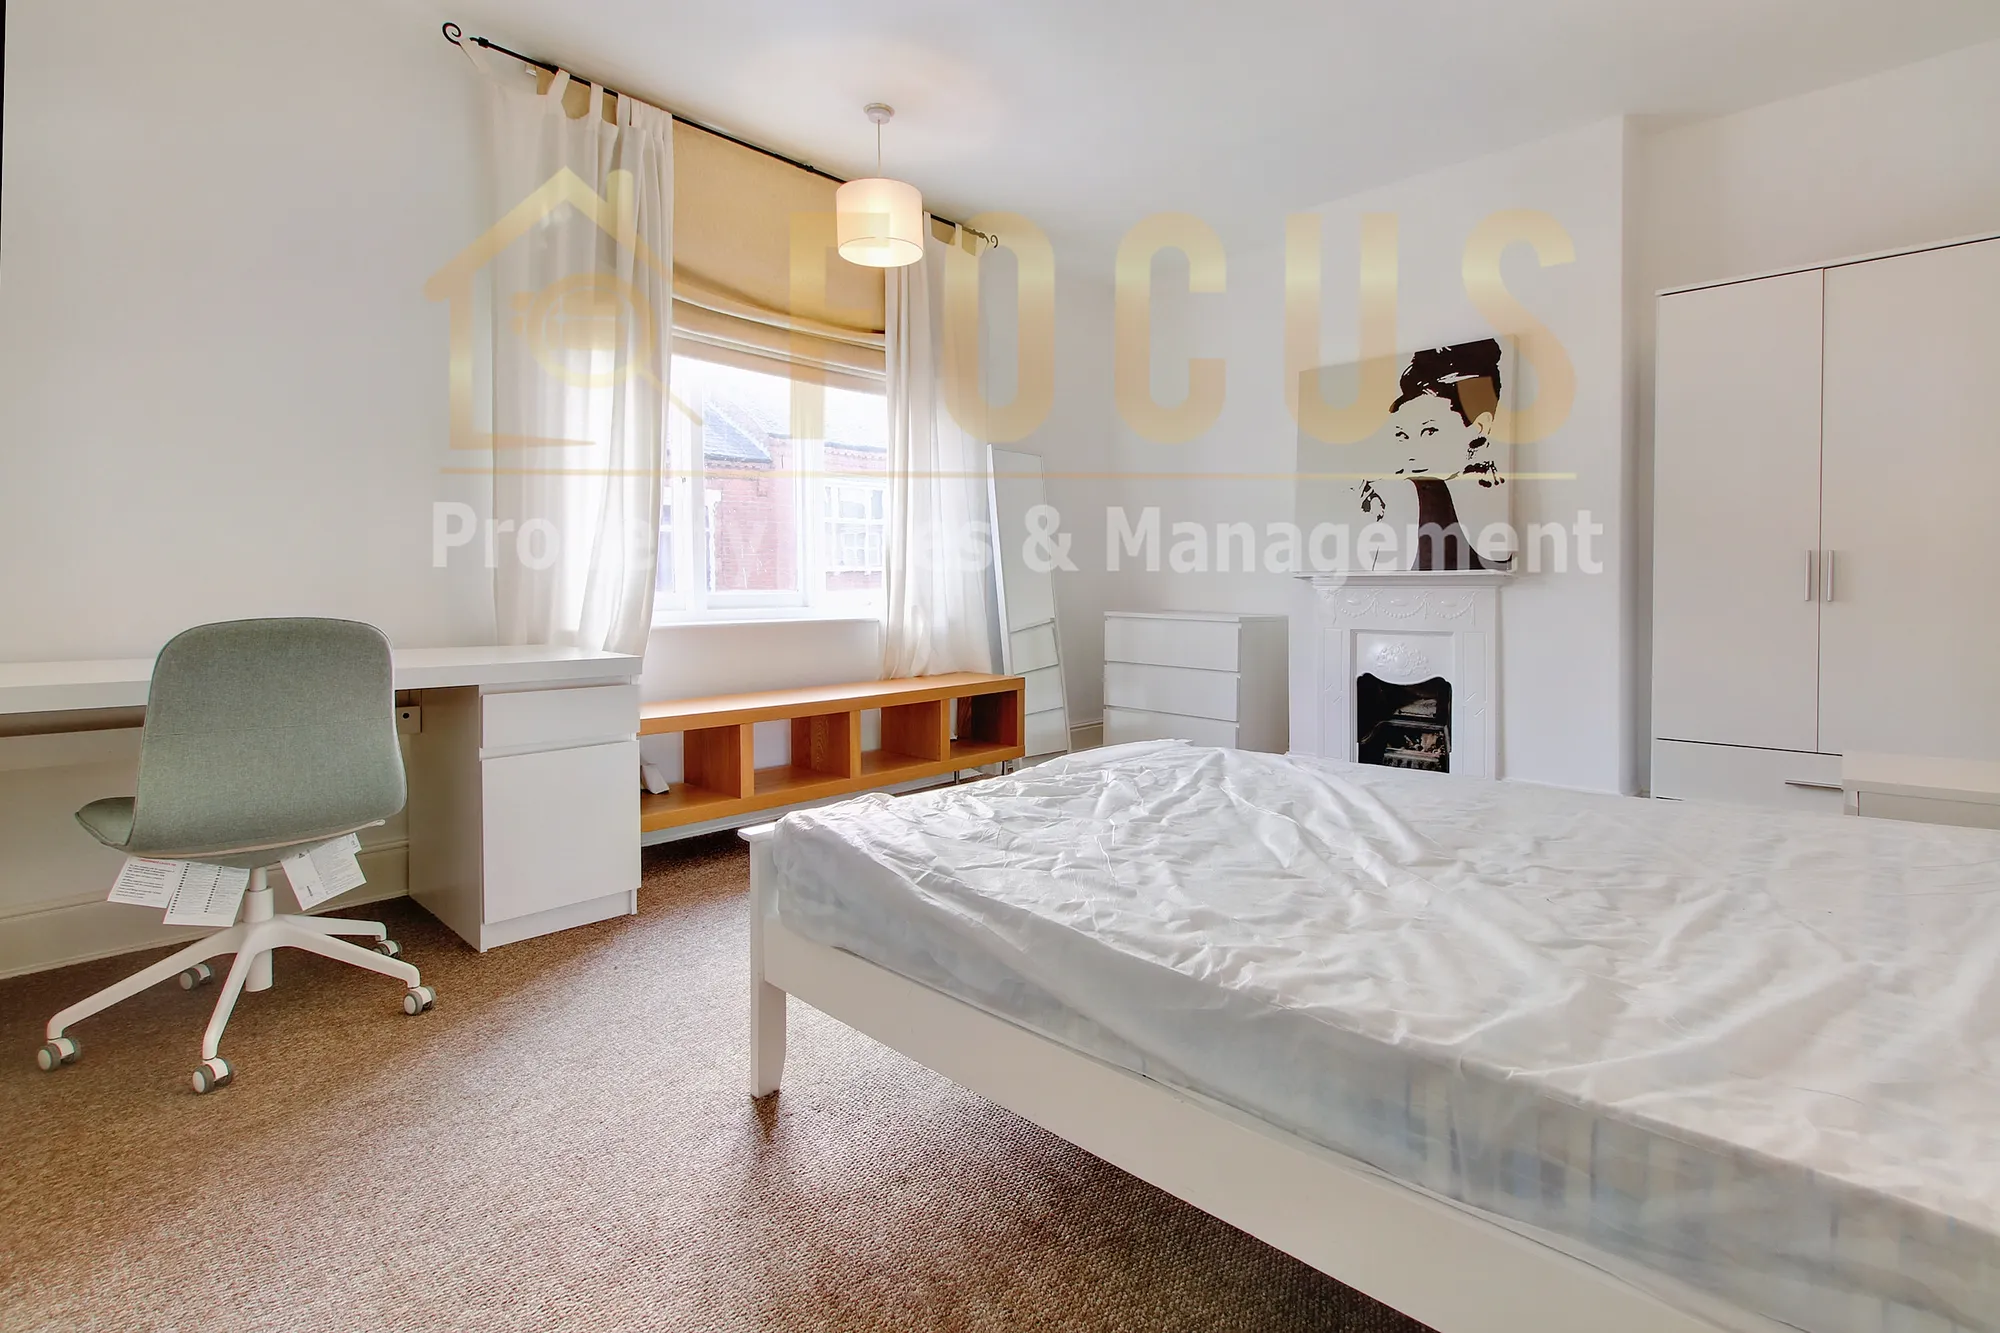 4 bed mid-terraced house to rent in Hartopp Road, Leicester  - Property Image 4